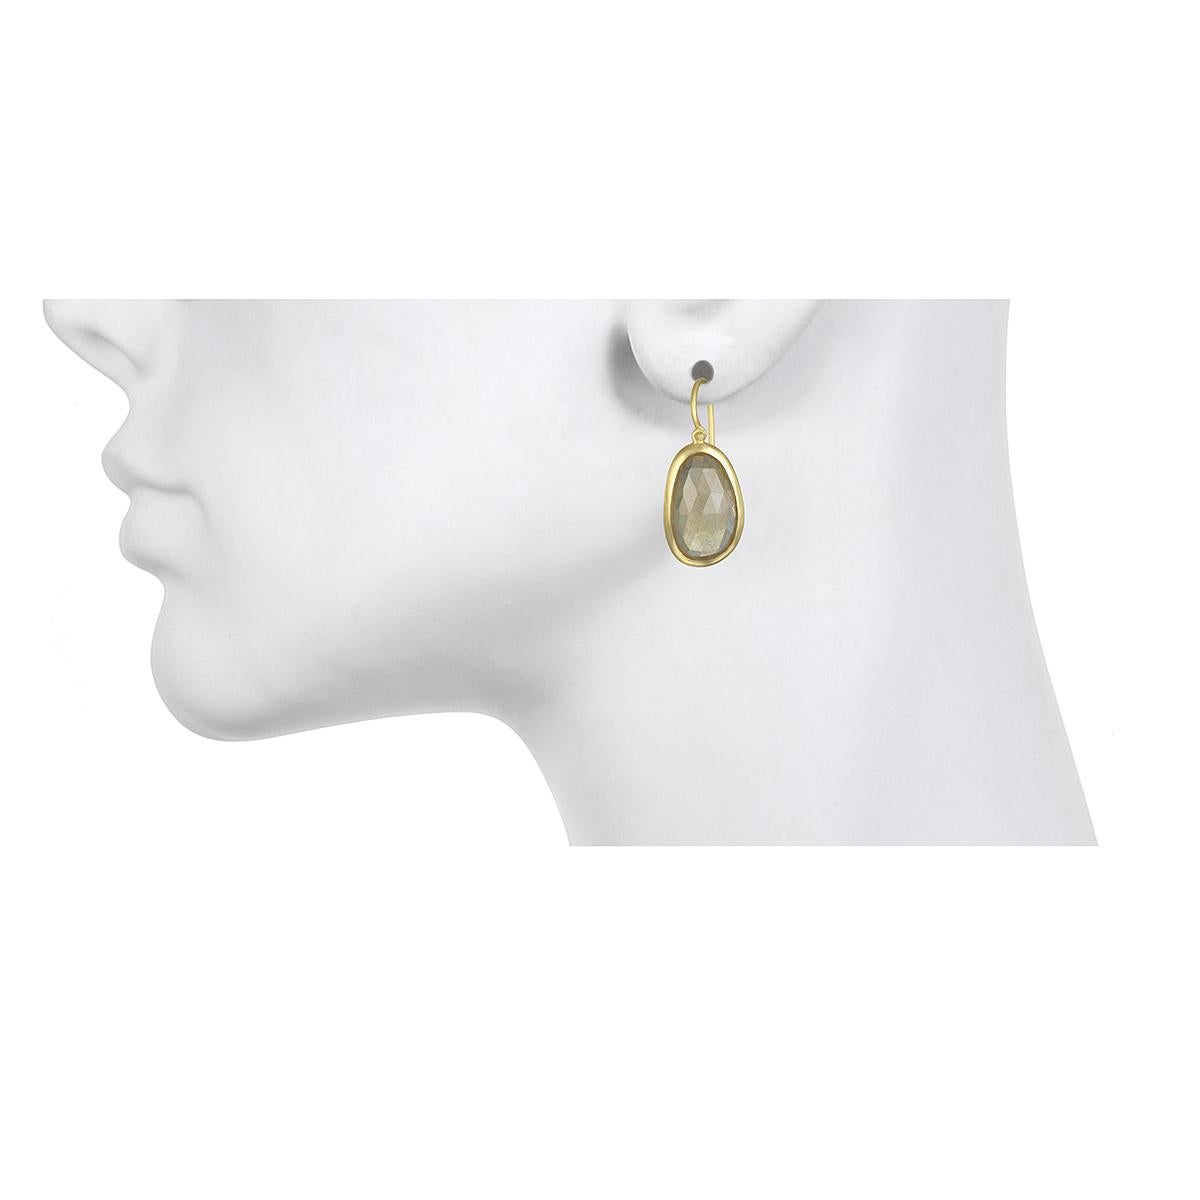 Simple, elegant, and beautiful! Handcrafted in 18k gold*, these rose-cut sapphire freeform-shaped slices are bezel set and hinged for movement. The sparkle and warm inviting color are understated and make these earrings easy to wear for any and all